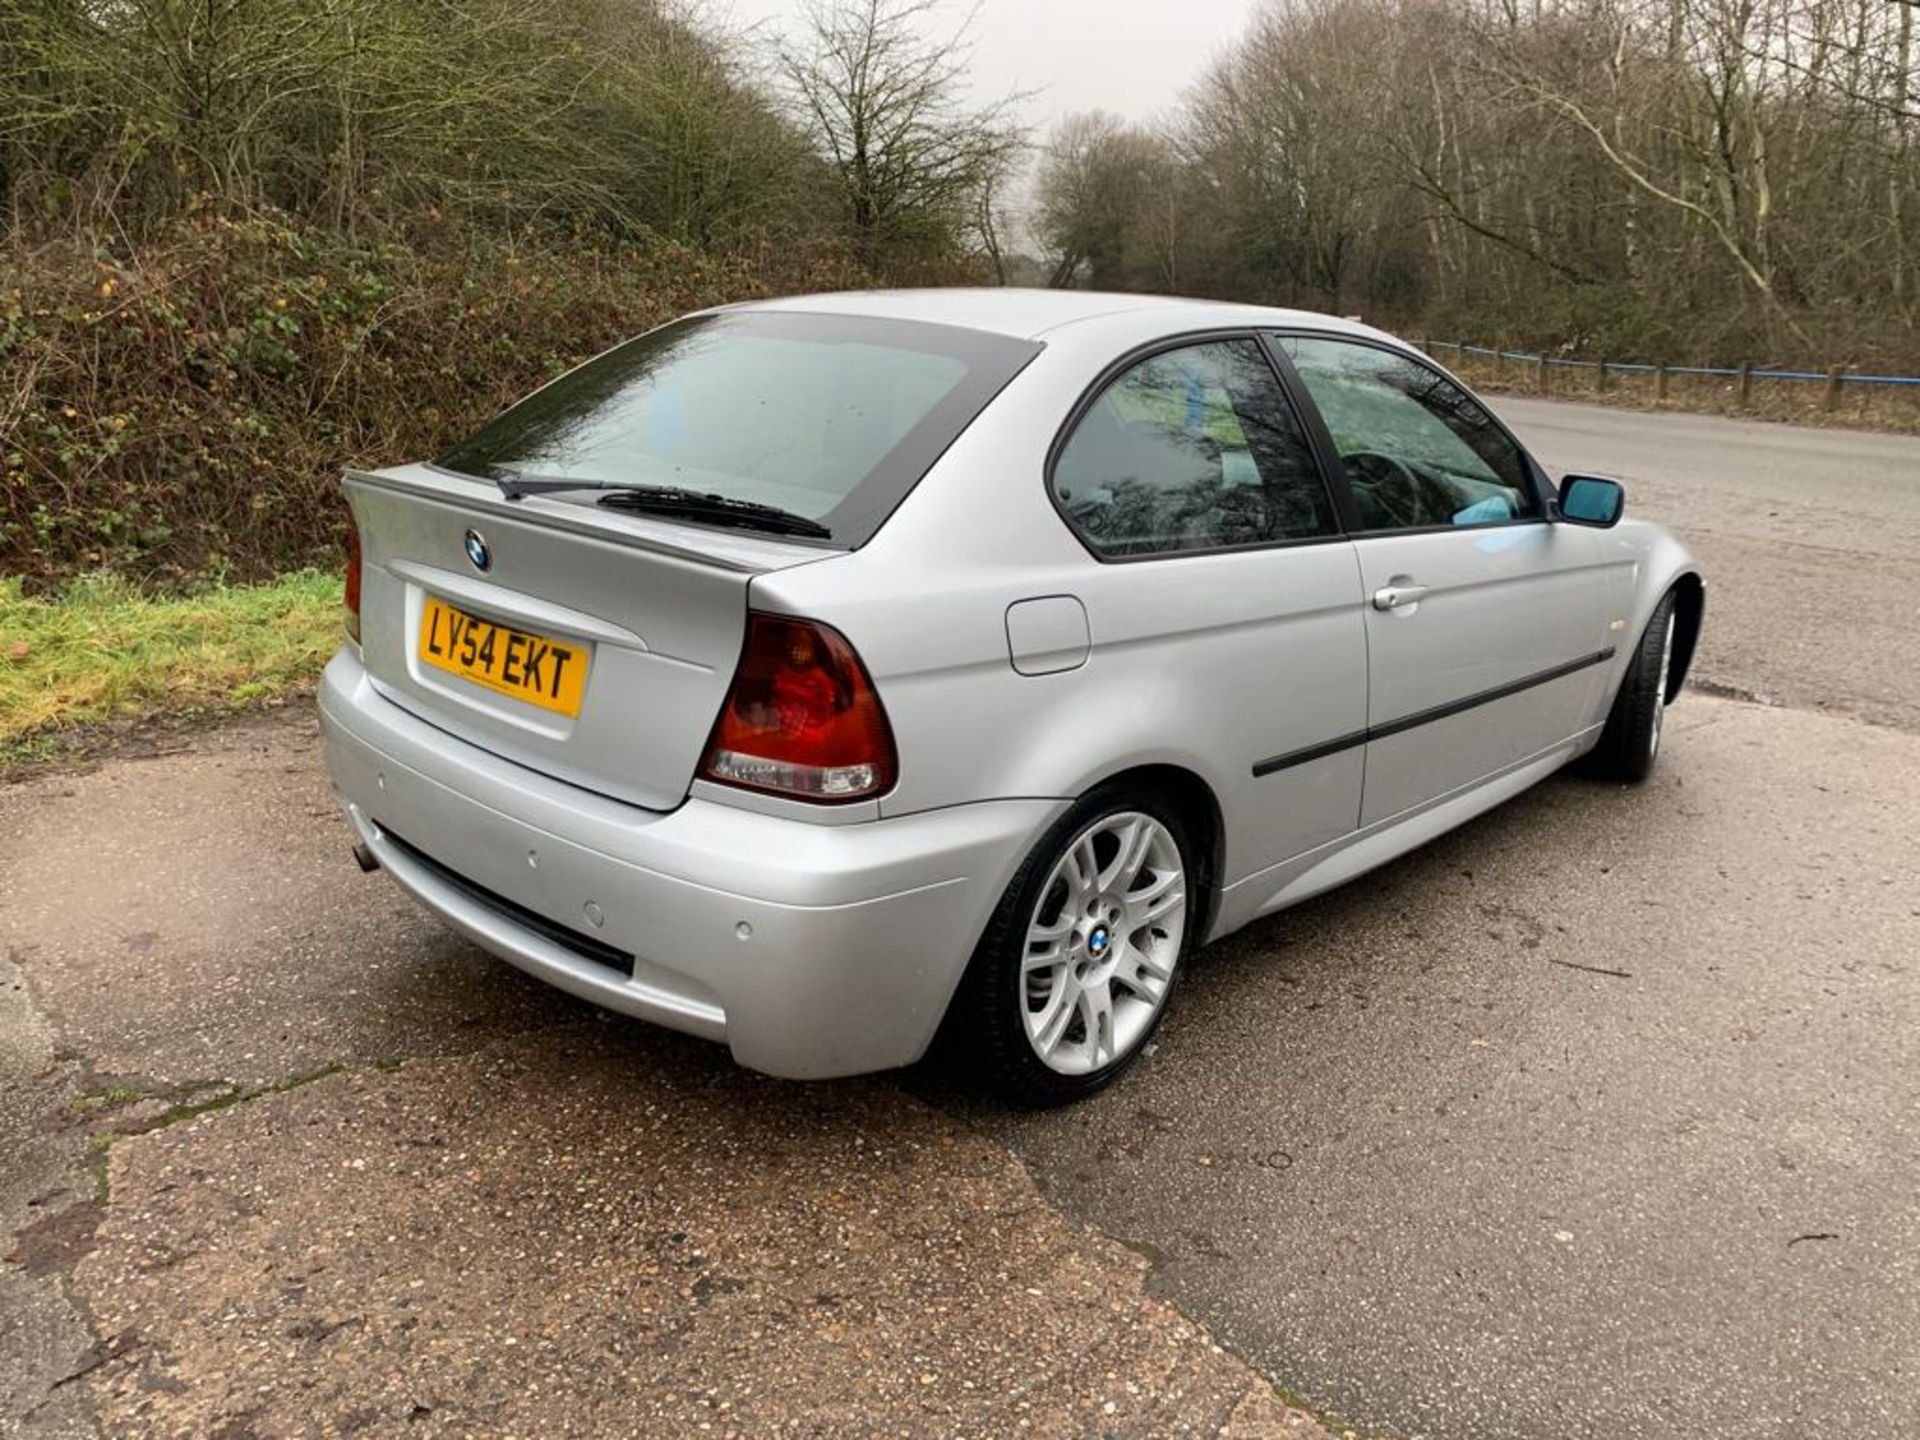 RARE 2004/54 REG BMW 316TI M SPORT COMPACT 1.8 PETROL SILVER 3DR HATCHBACK LOW MILES SERV HISTORY - Image 7 of 18